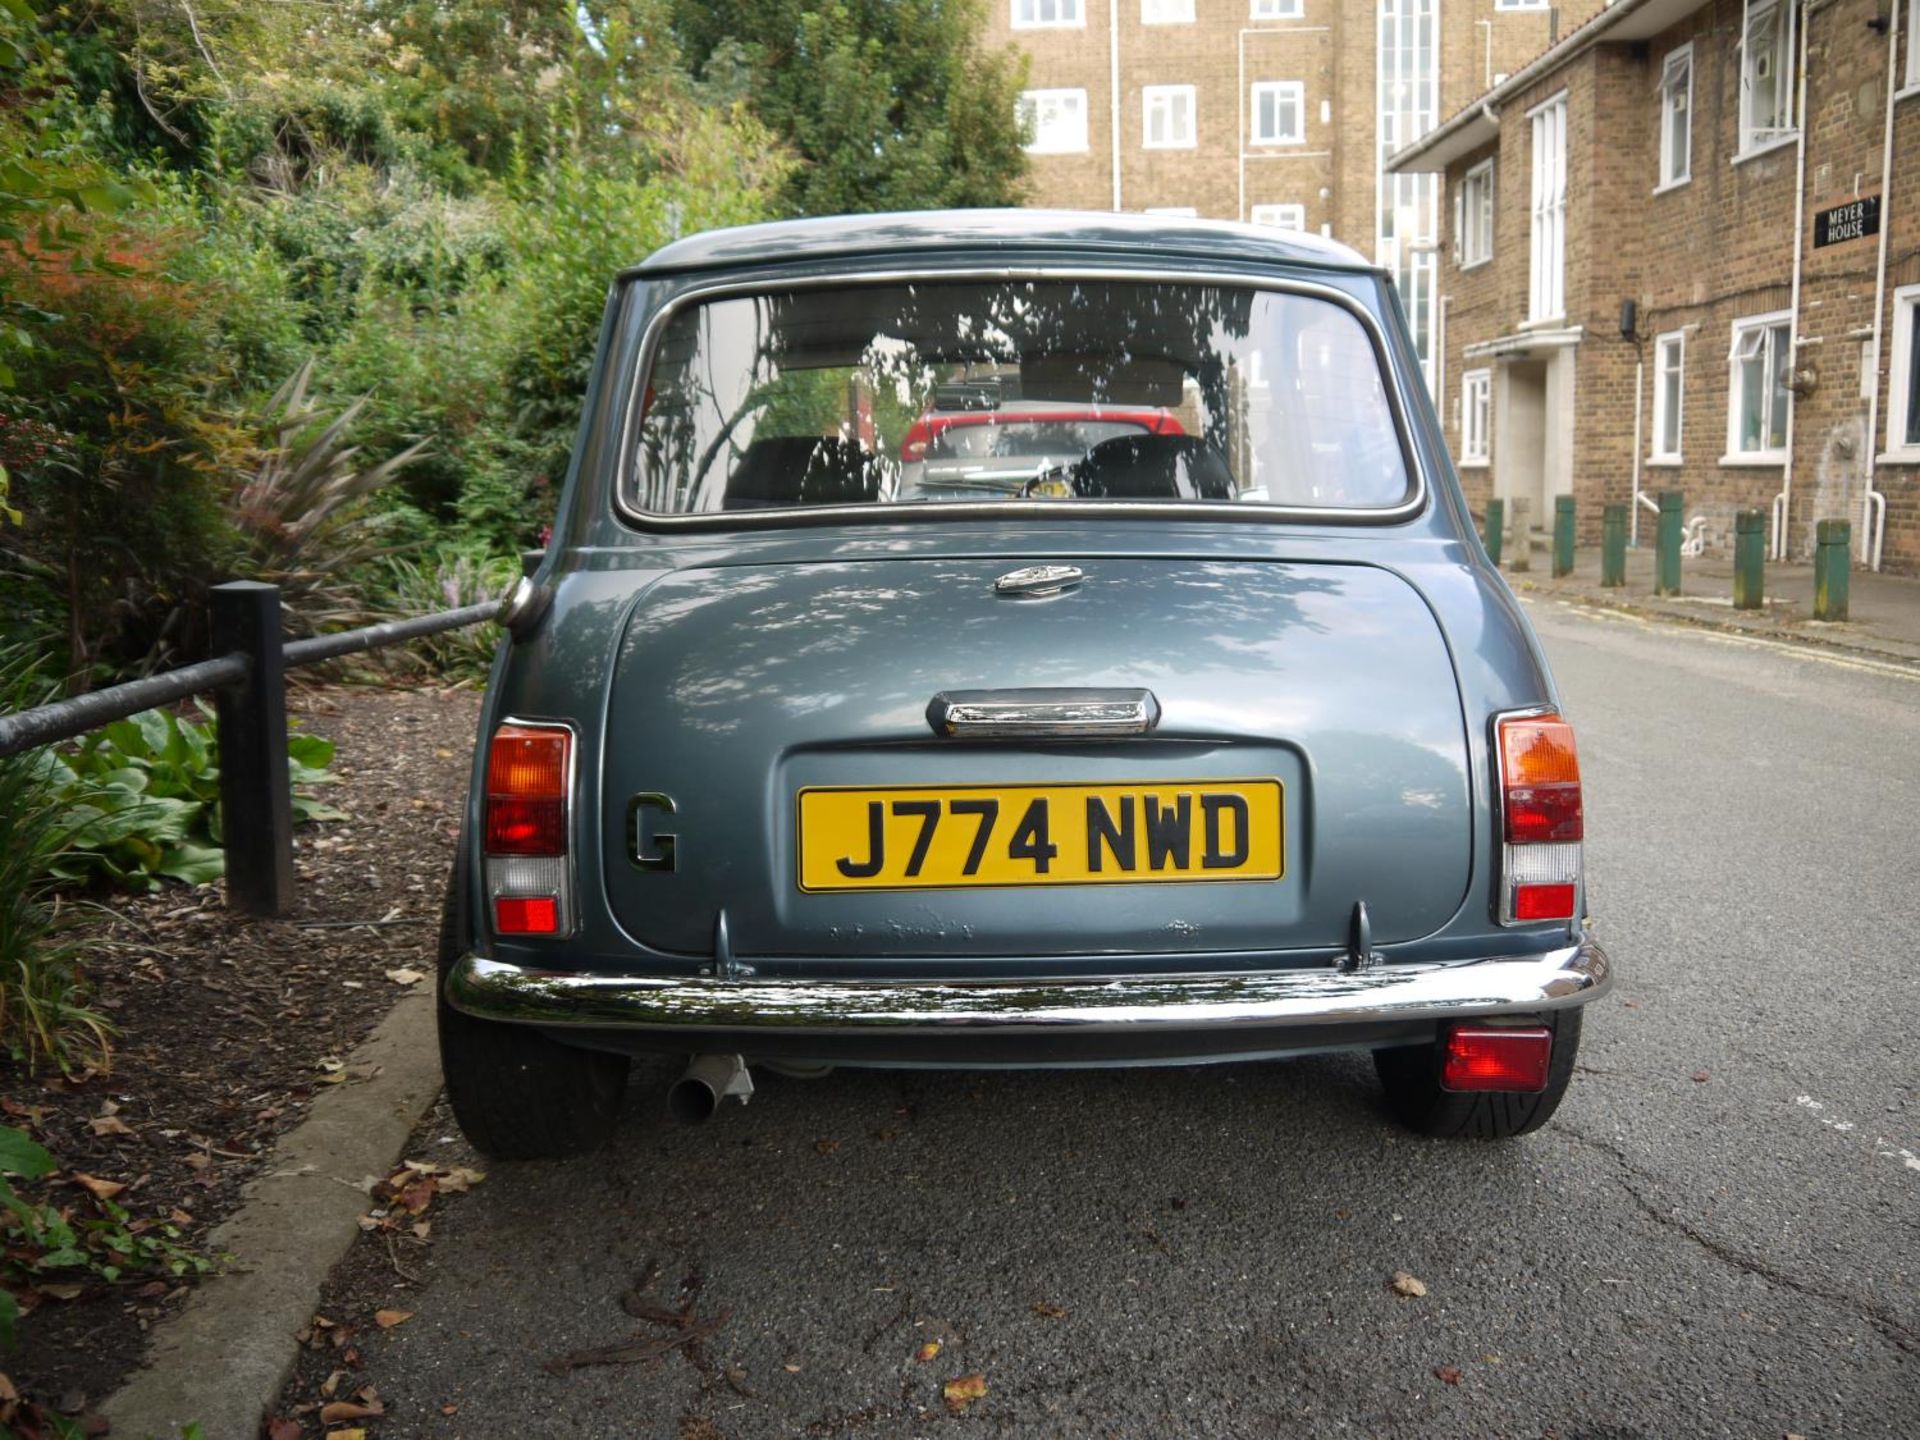 1991 ROVER MINI NEON Registration Number: J774 NWD Recorded Mileage: 58,000 miles Chassis Number: - Bild 12 aus 24